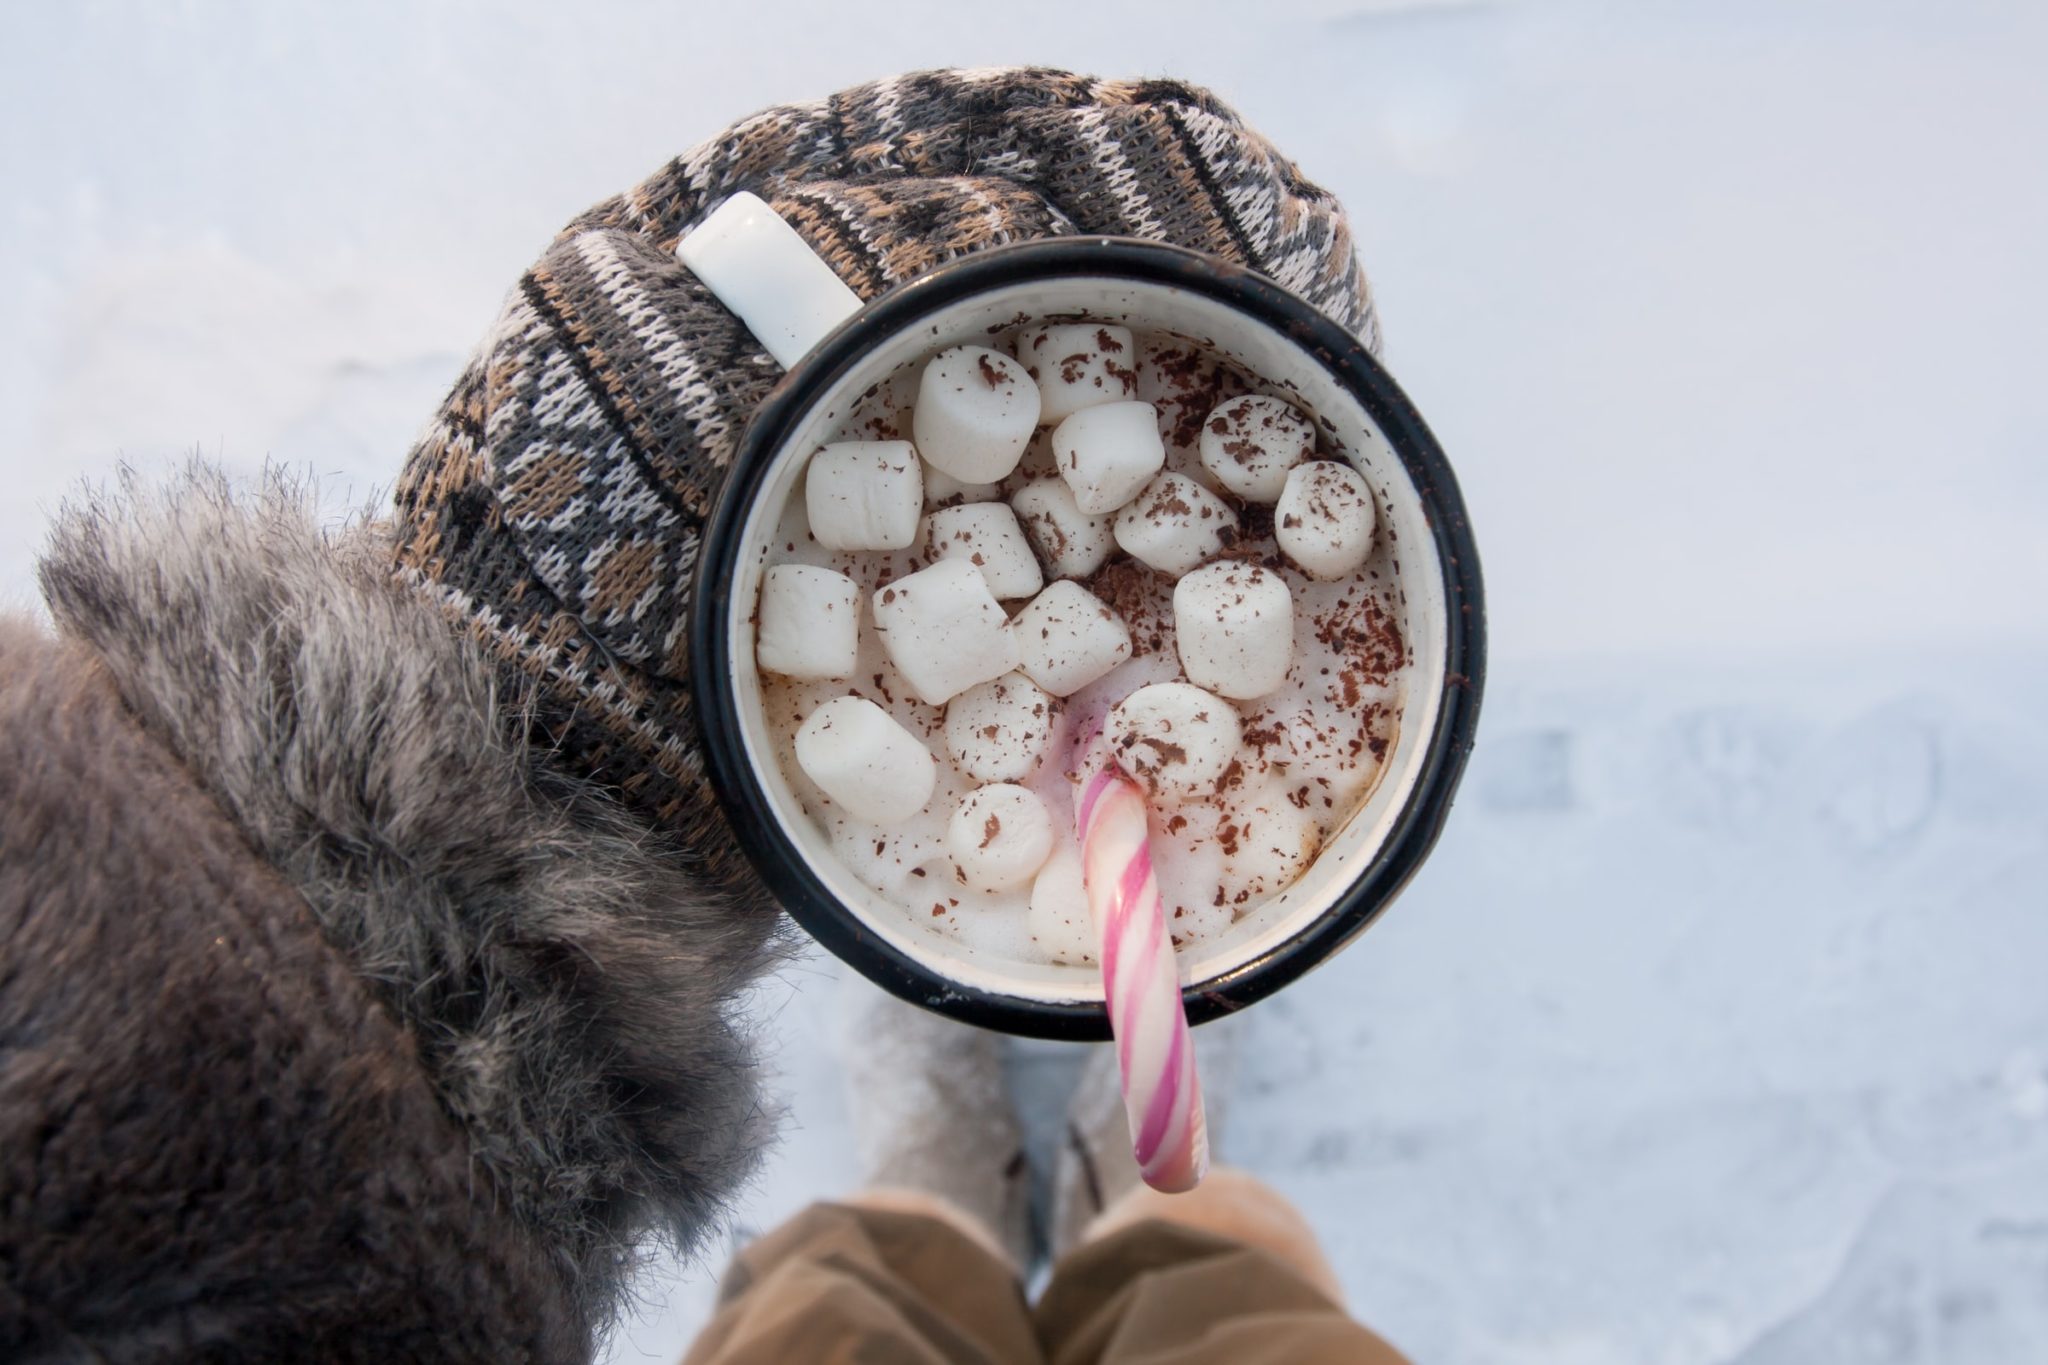 Photo of a cup of hot chocolate with marshmallows and a candy cane being held by a hand in a brown and white mitten.